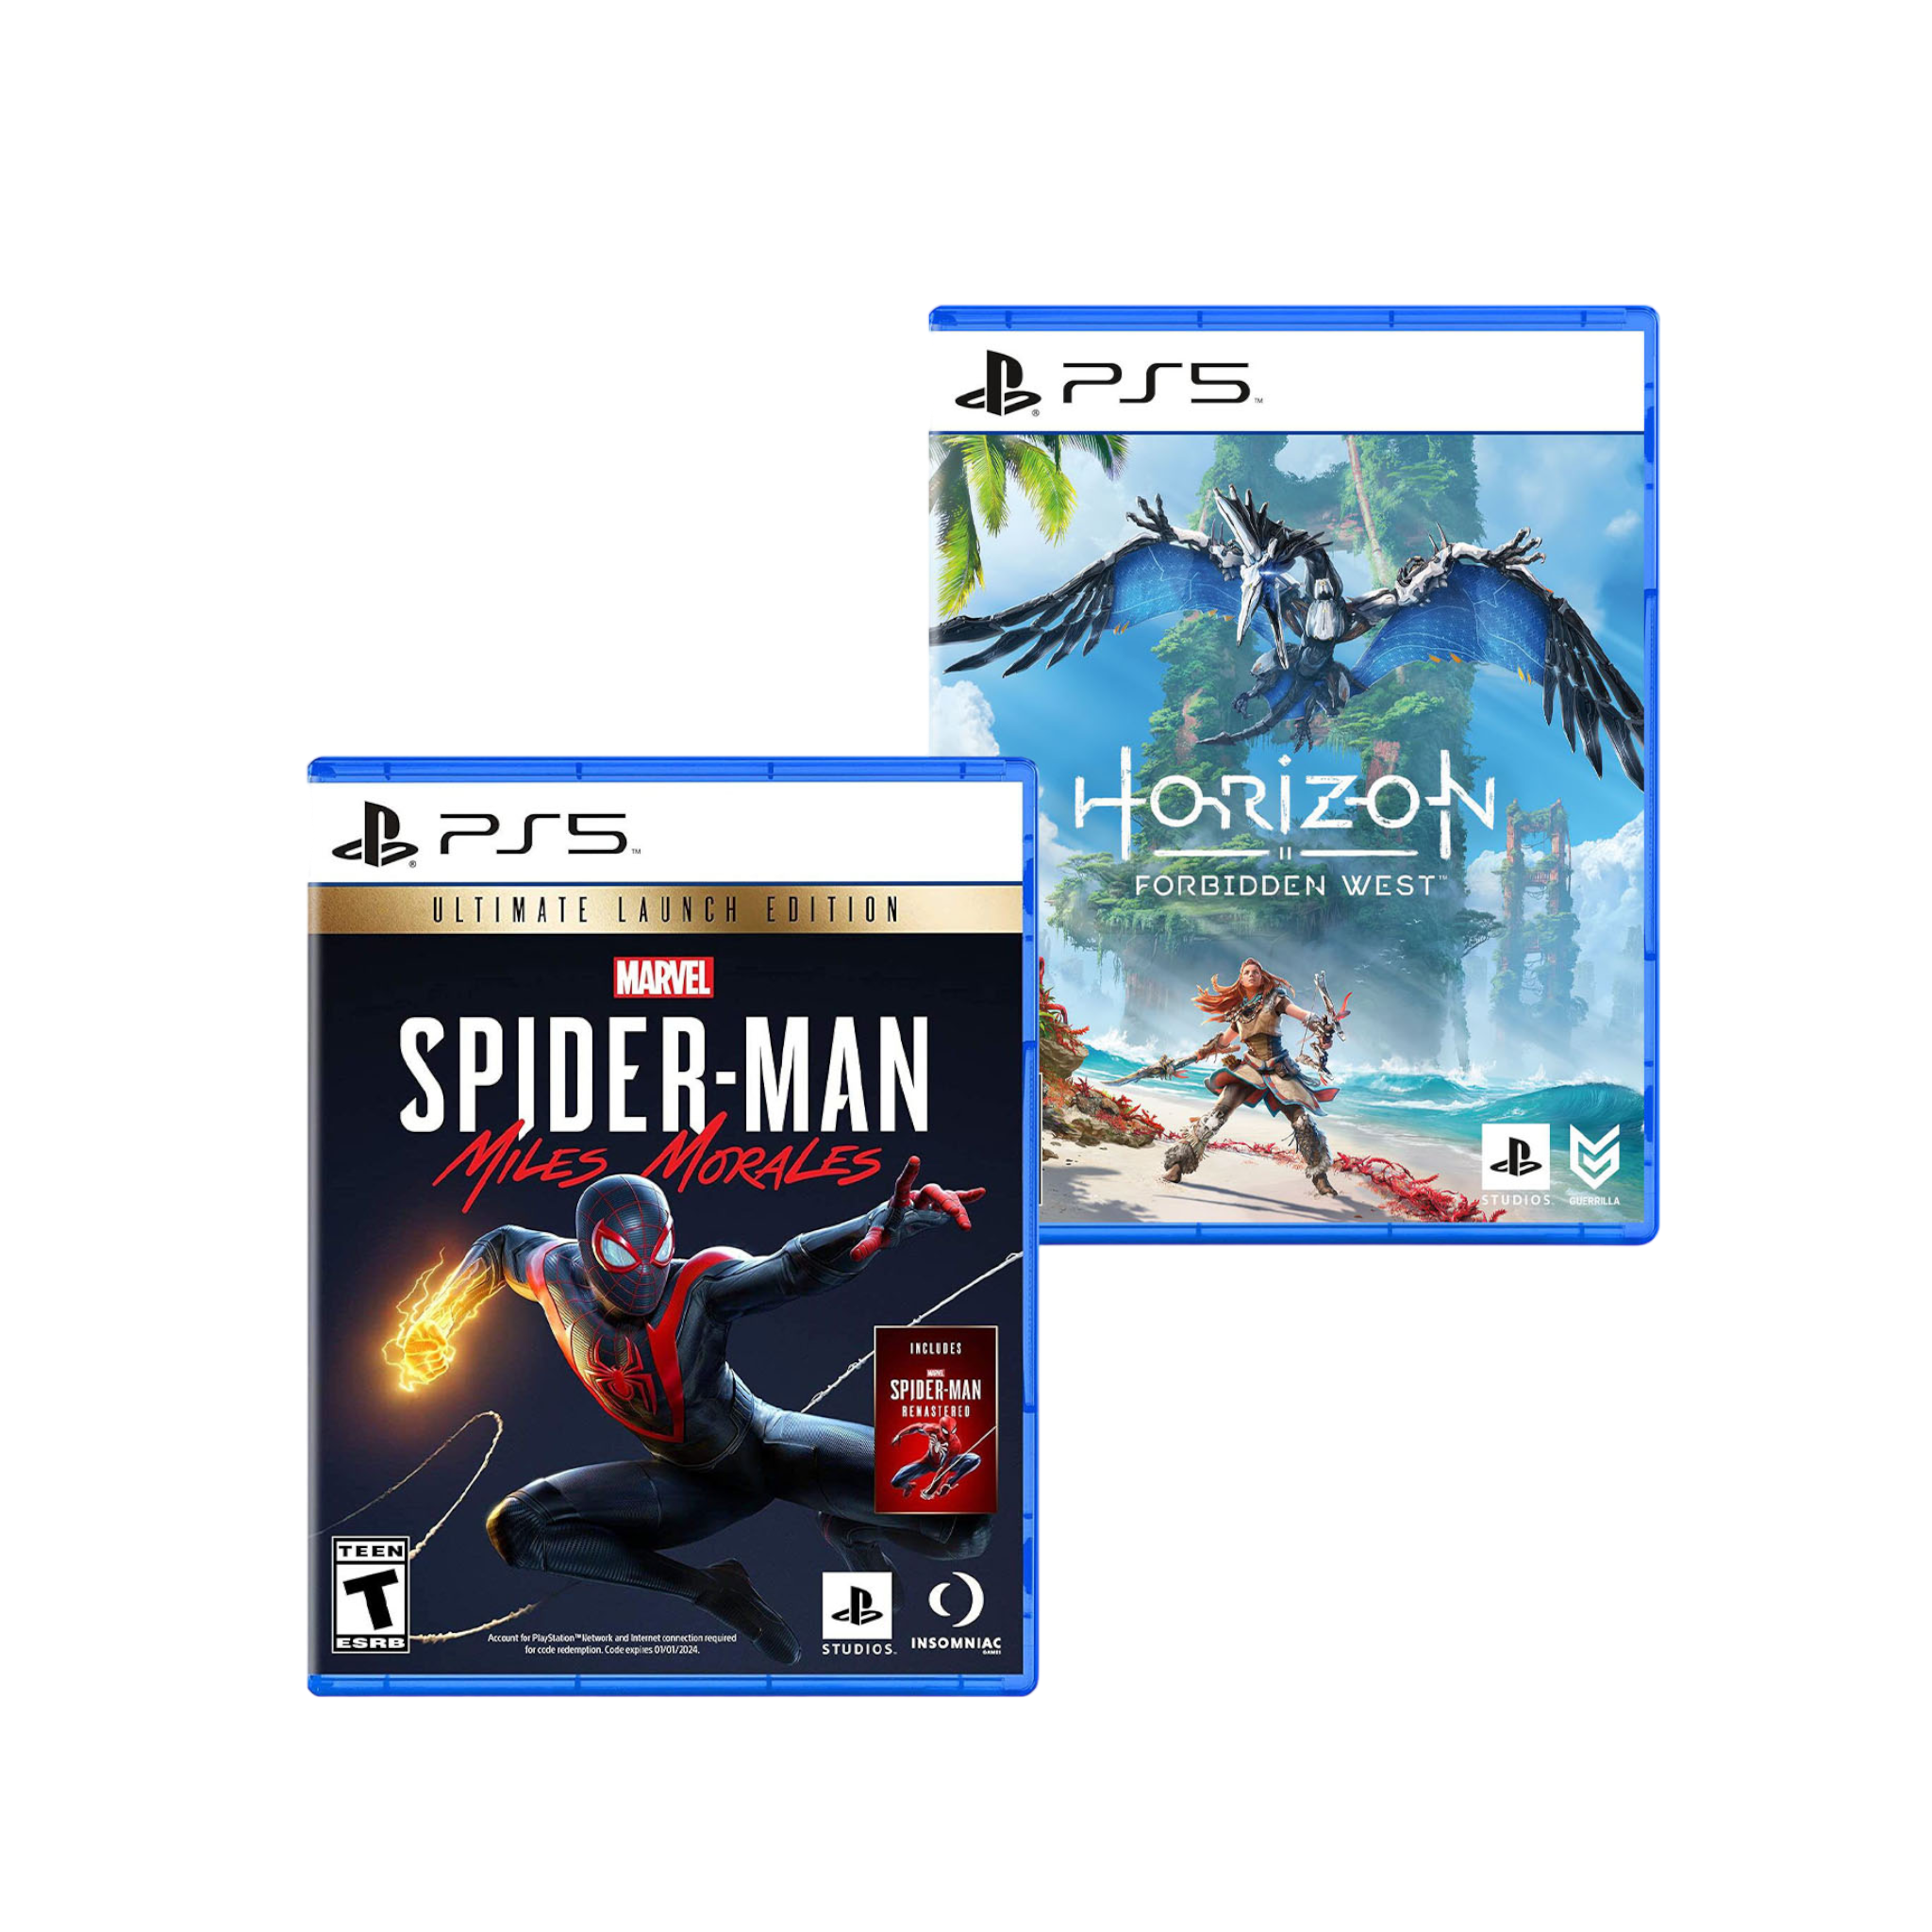 Launch Bundle Forbidden Pro-Distributing freeshipping for West Playstation Horizon and Spider-Man: - Marvel\'s 5 Miles Ultimate Morales Edition